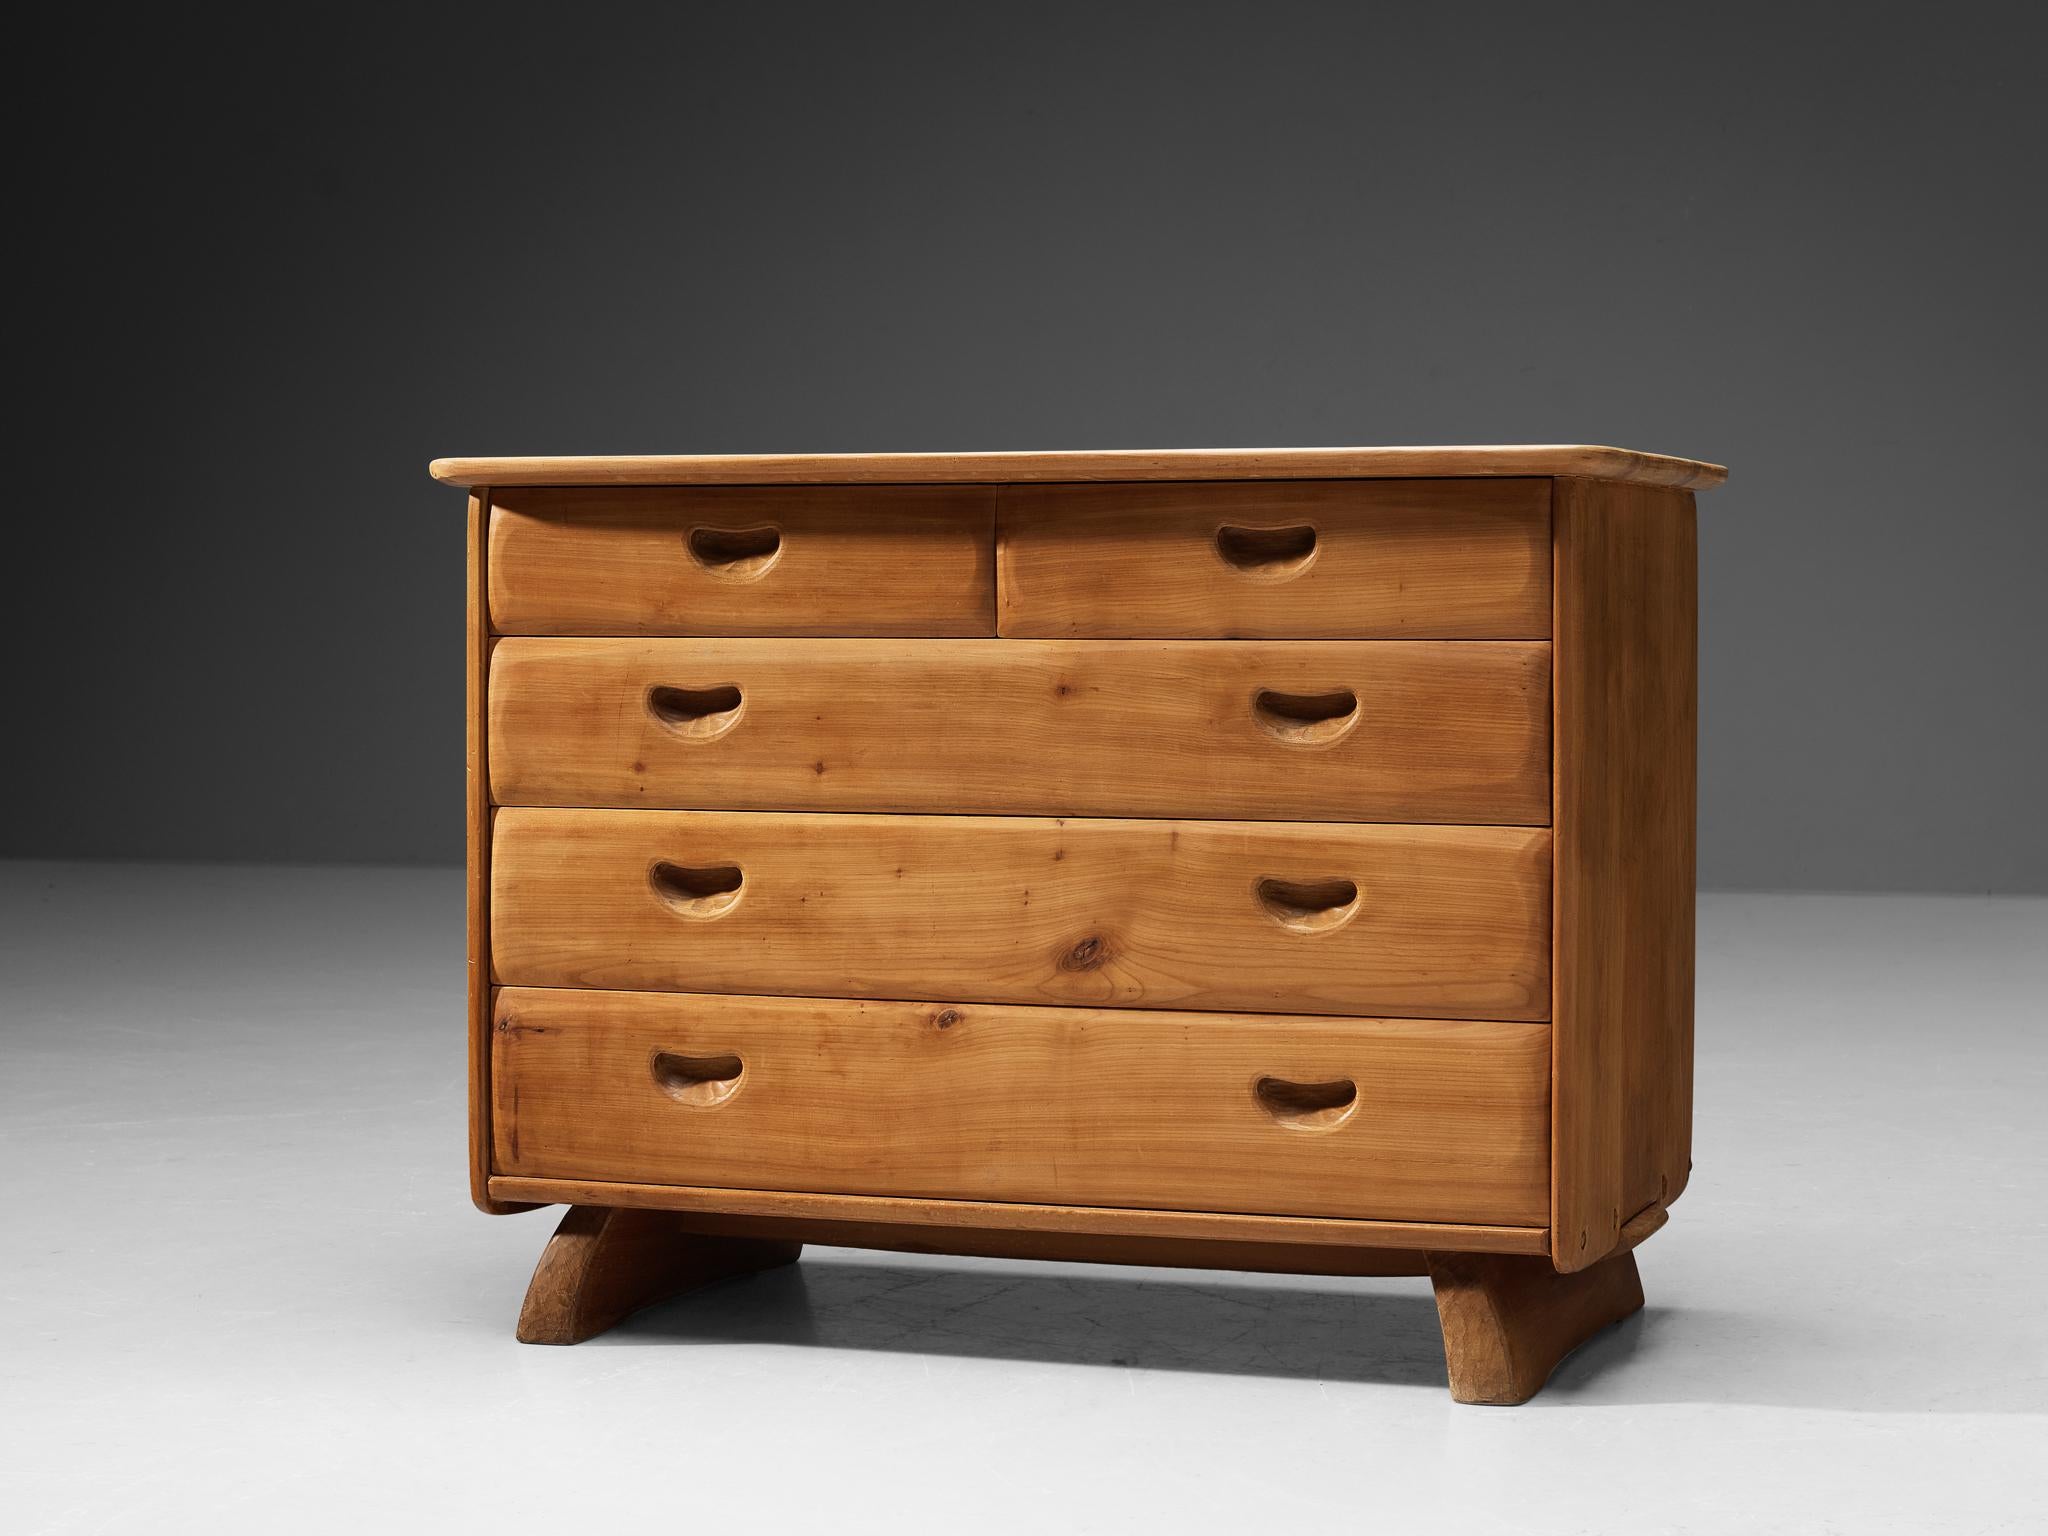 Franz Xaver Sproll, chest of drawers, elm, Switzerland, 1960s 

Swiss furniture maker Franz Xaver Sproll is known for high-quality, hand-crafted furniture in solid wood, featuring characteristic details. This chest of drawers, par example, shows